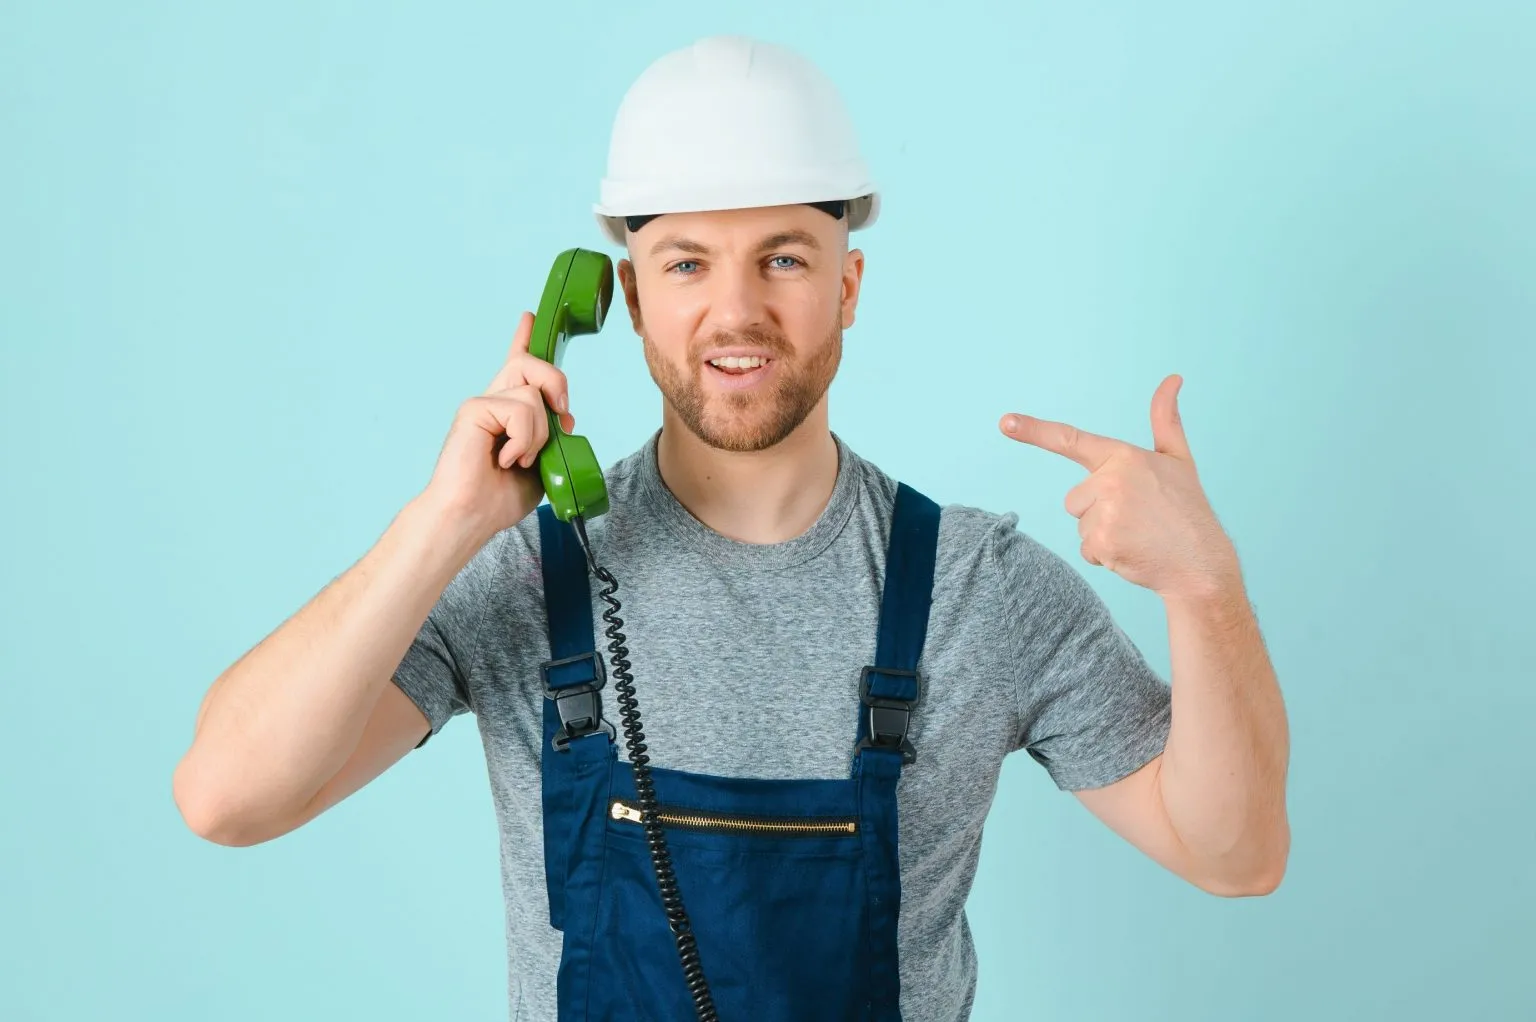 Top 10 Reasons to Call an Electrician